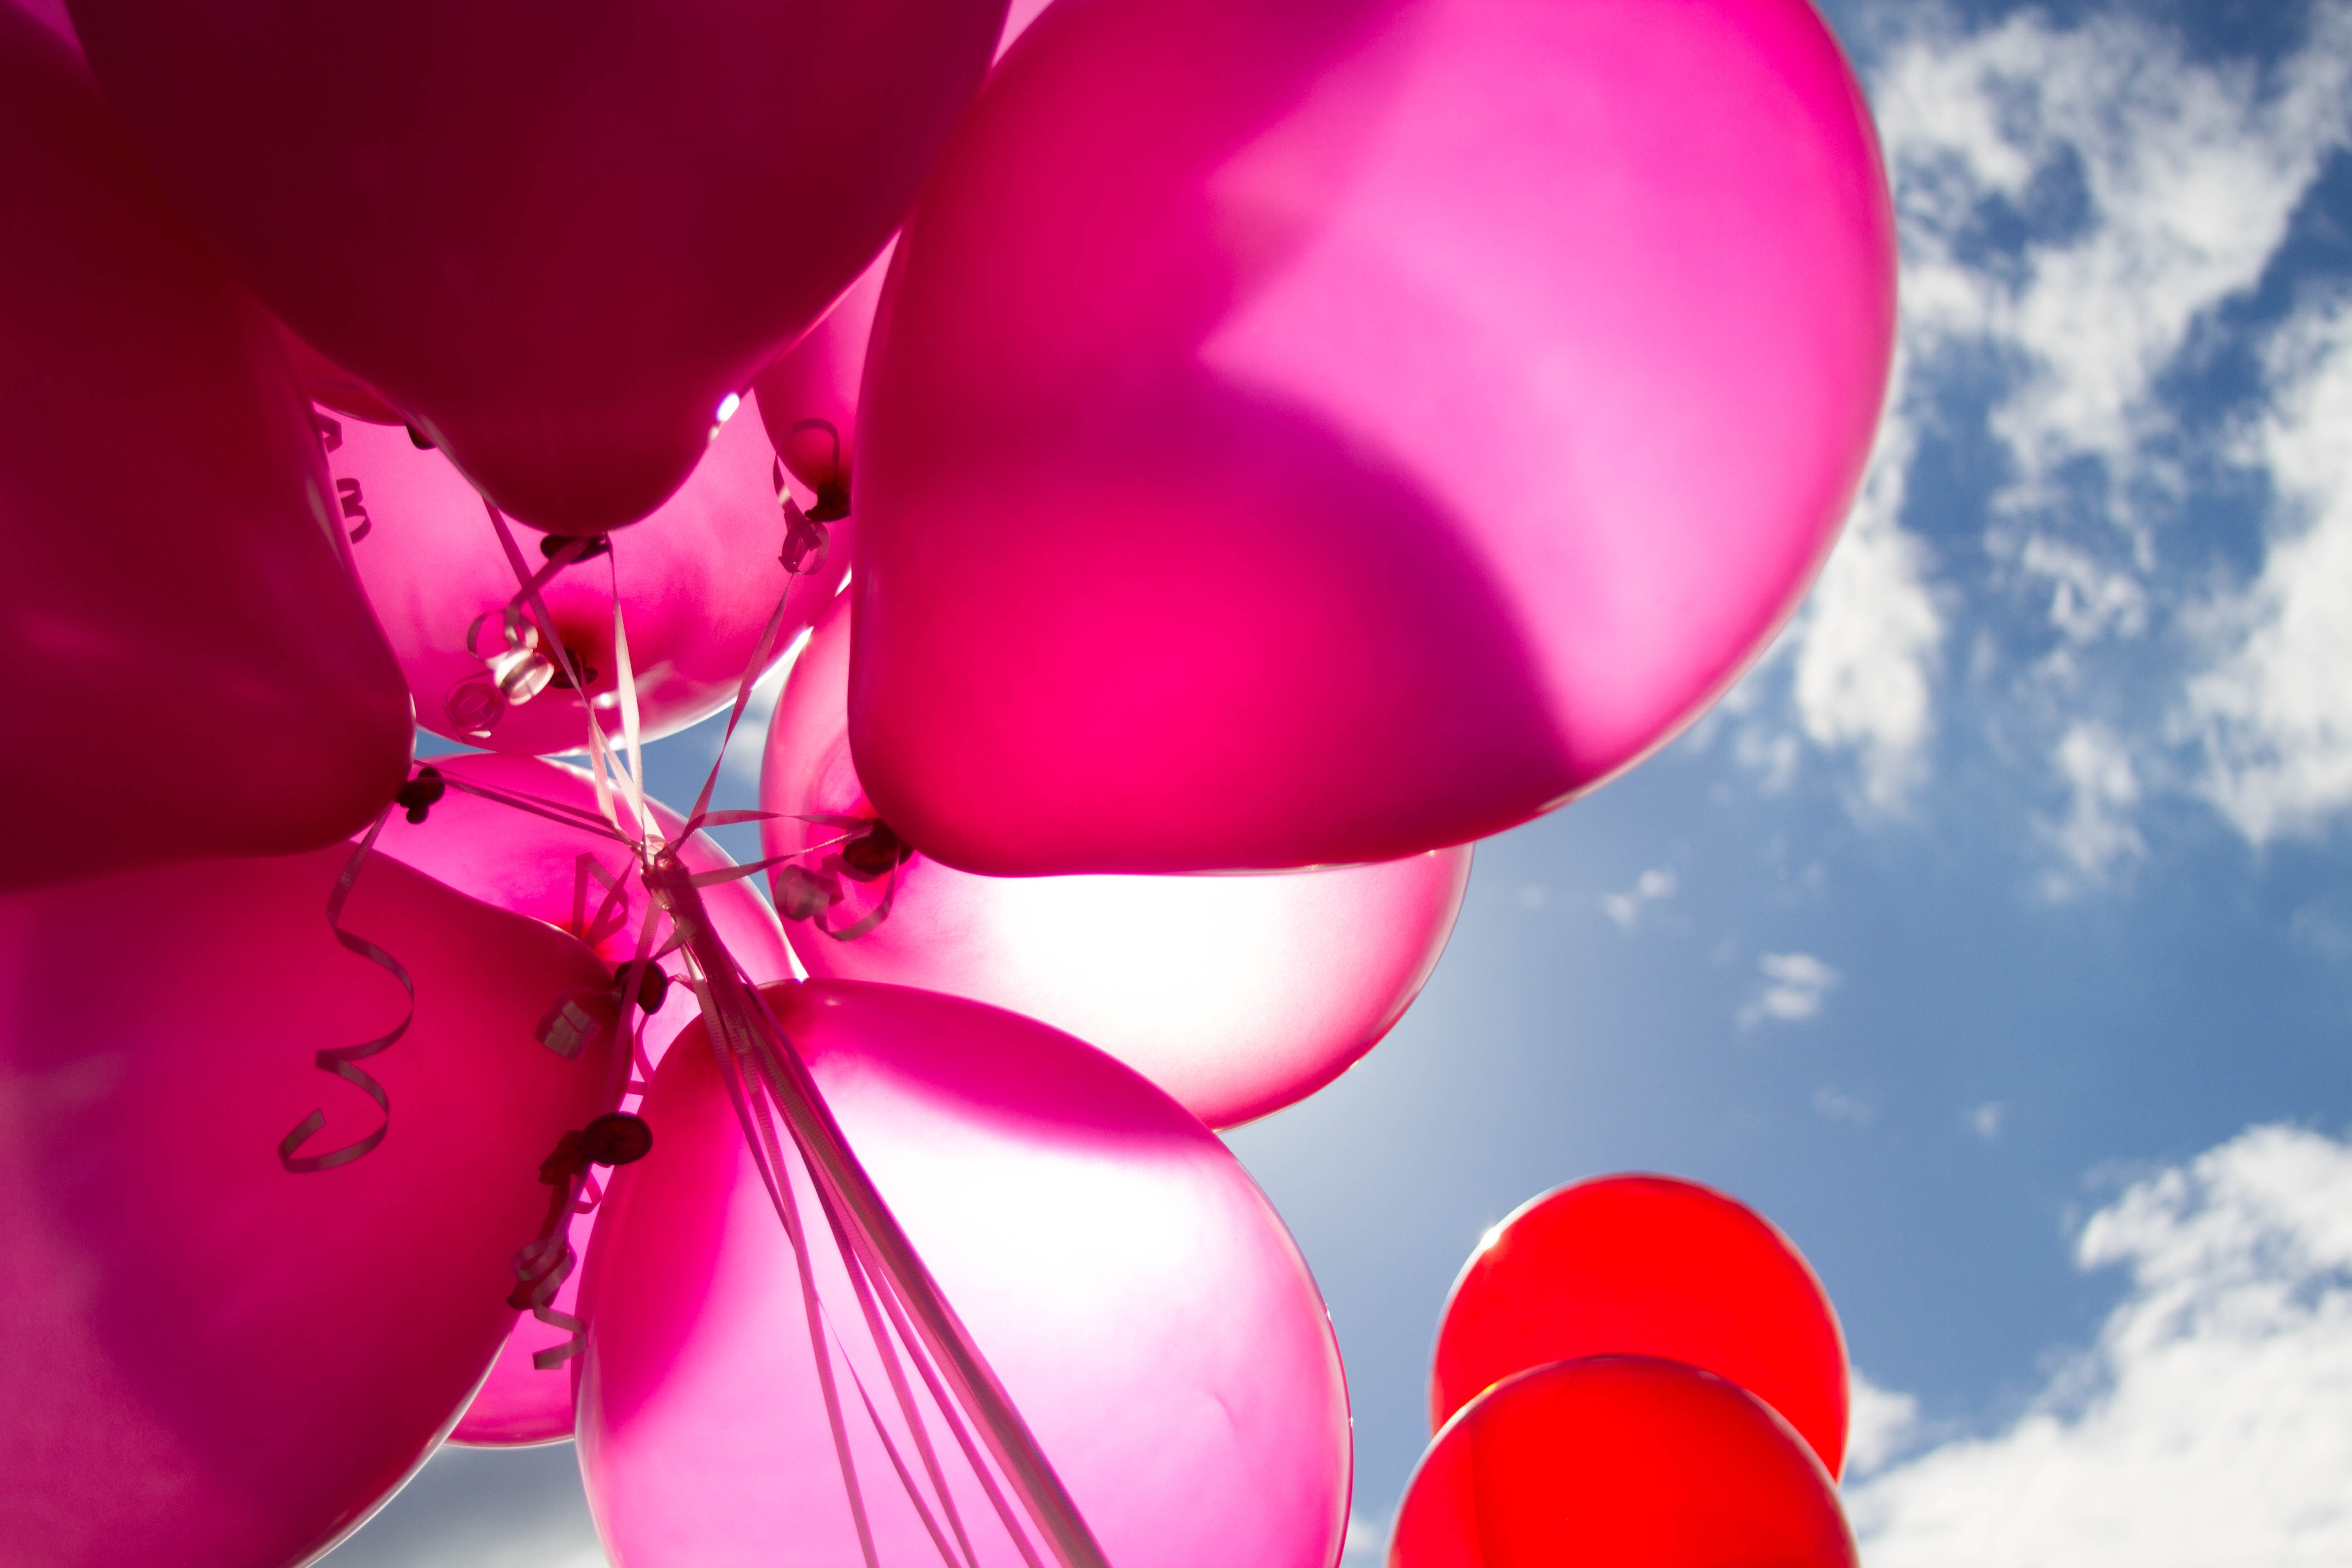 Pink and red balloons during daytime photo